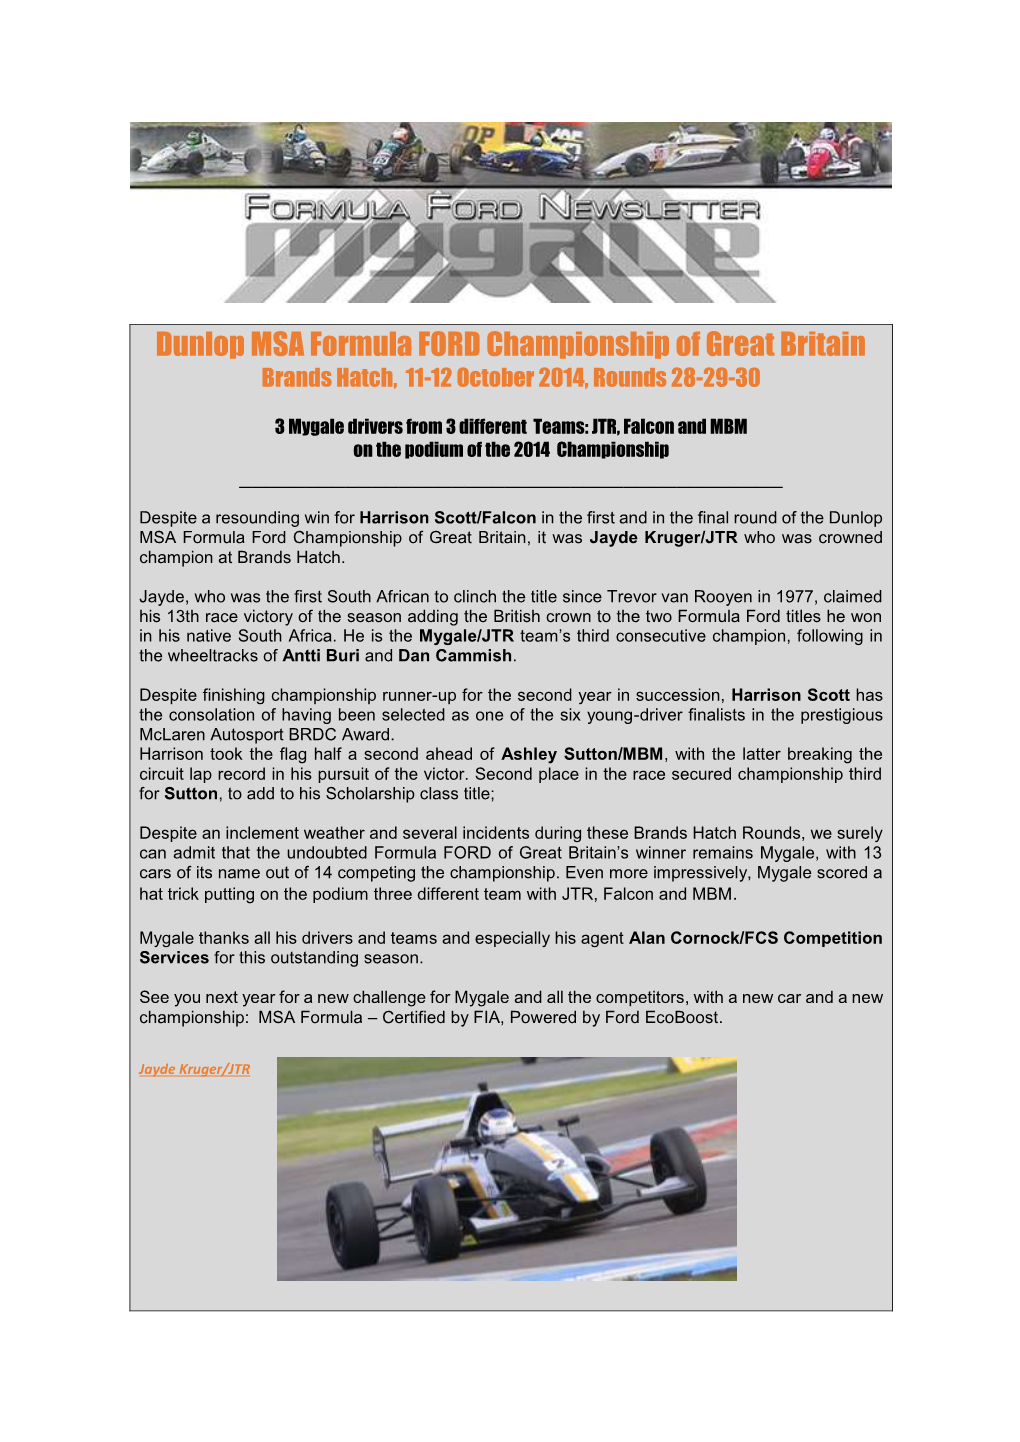 Dunlop MSA Formula FORD Championship of Great Britain Brands Hatch, 11-12 October 2014, Rounds 28-29-30